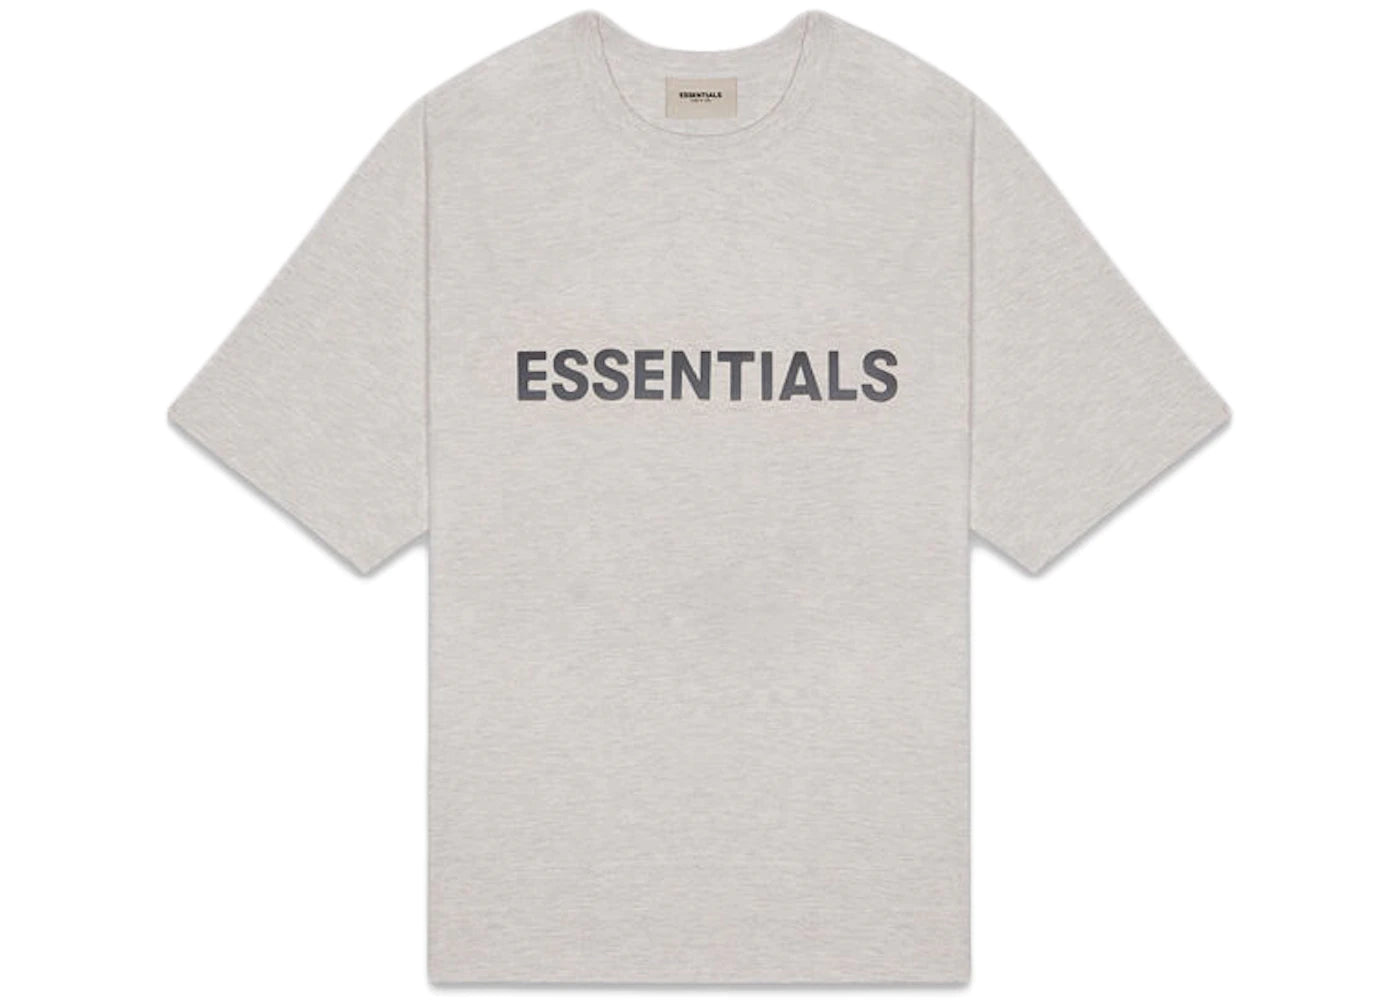 ESSENTIALS FEAR OF GOD TSHIRT HEATHER FRONT 3D